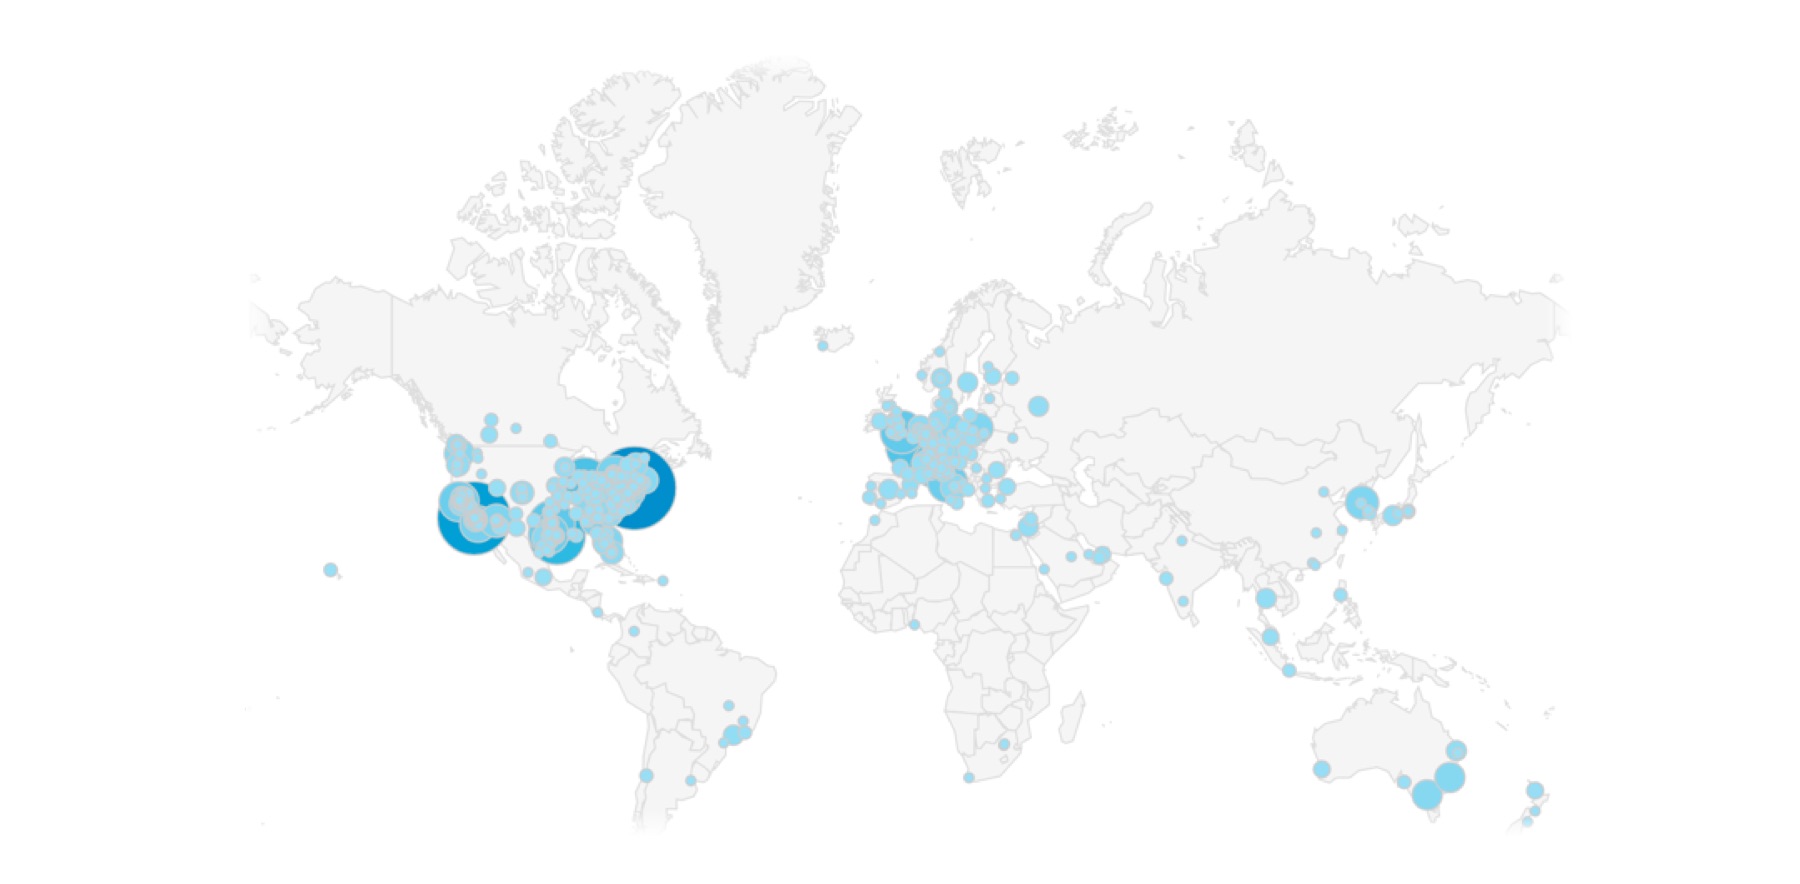 A map showing visitors from around the world to the site